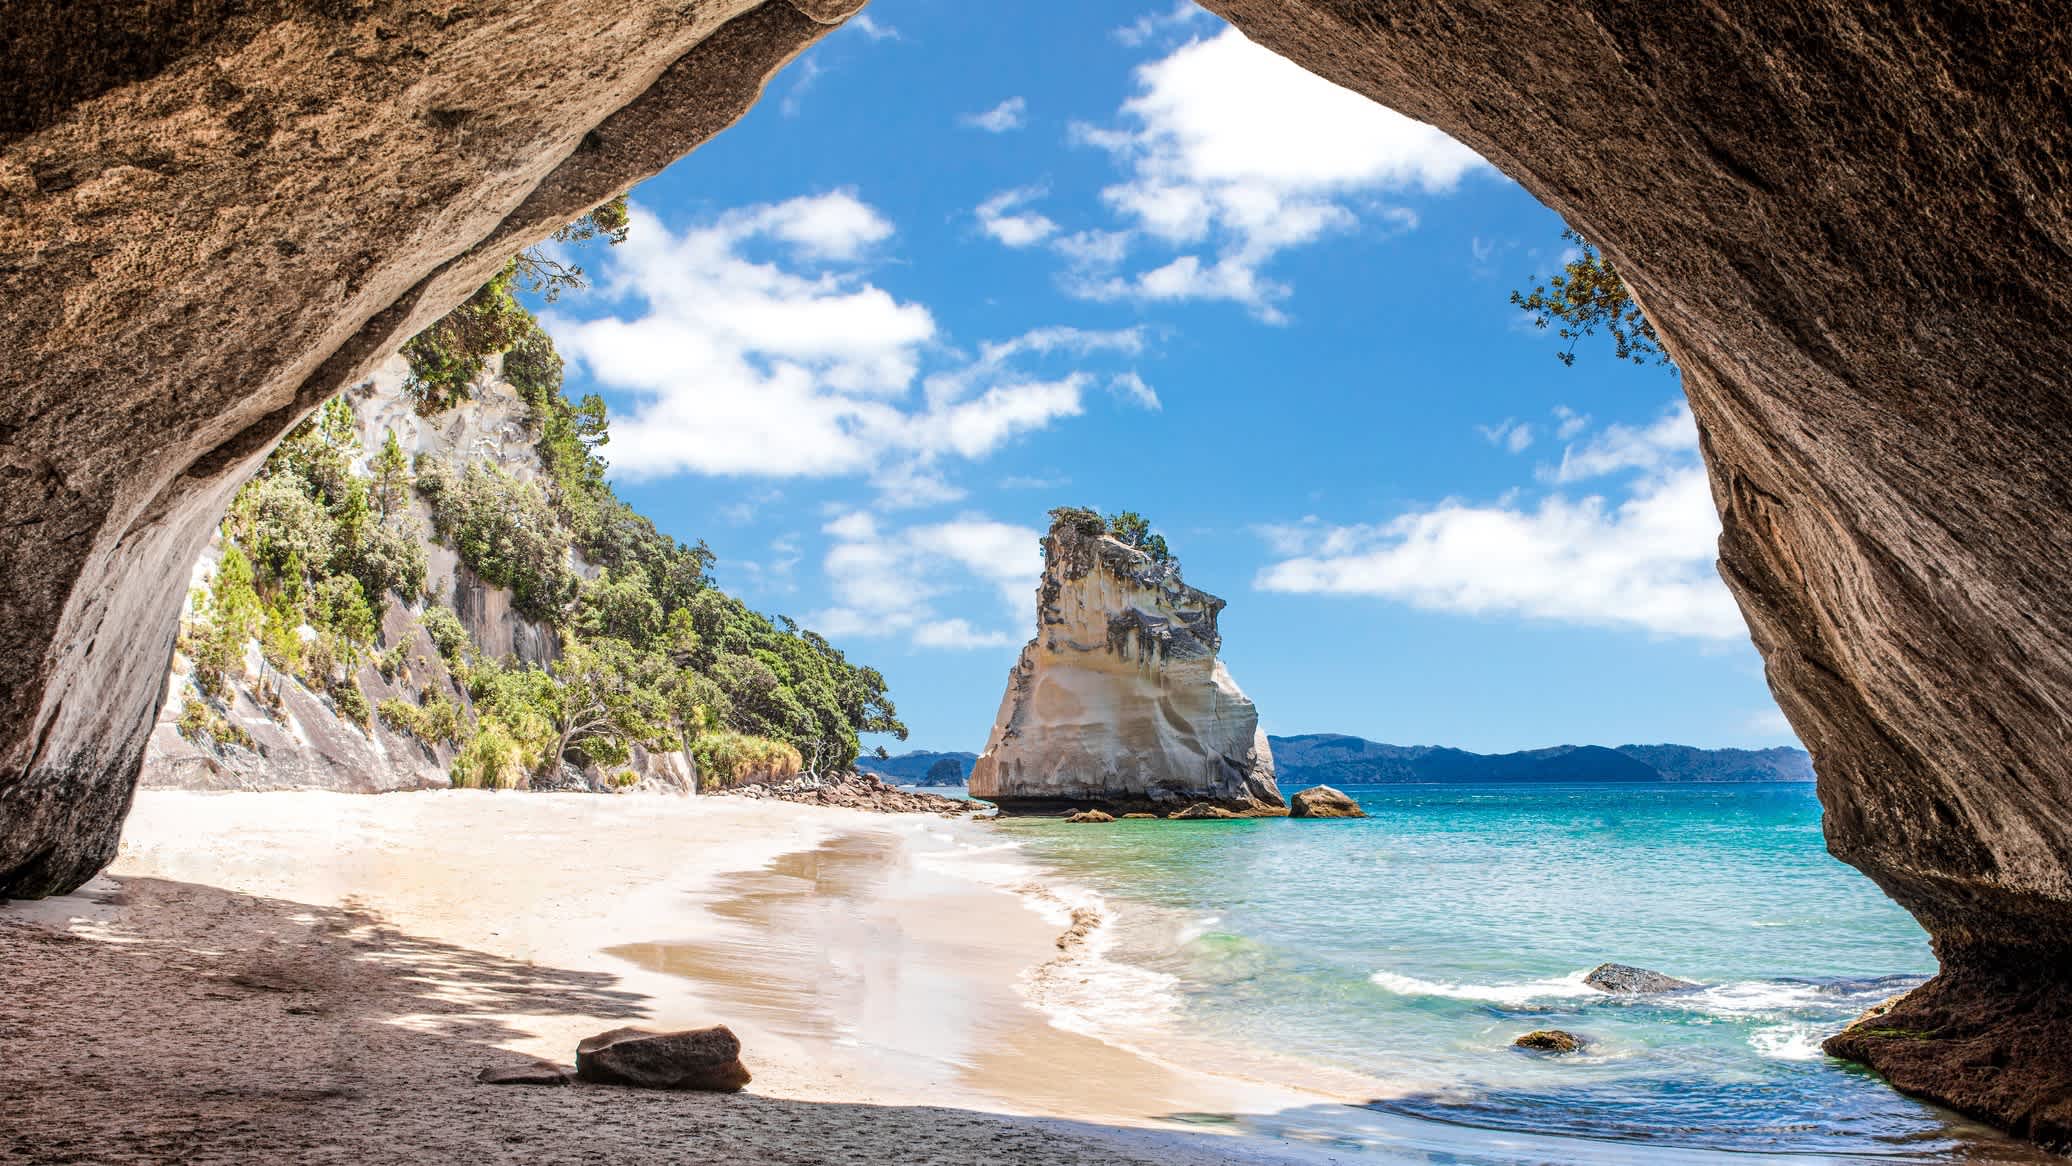 View of Cathedral Cove beach, its natural arch, white sand and clear waters, Coromandel Peninsula, New Zealand